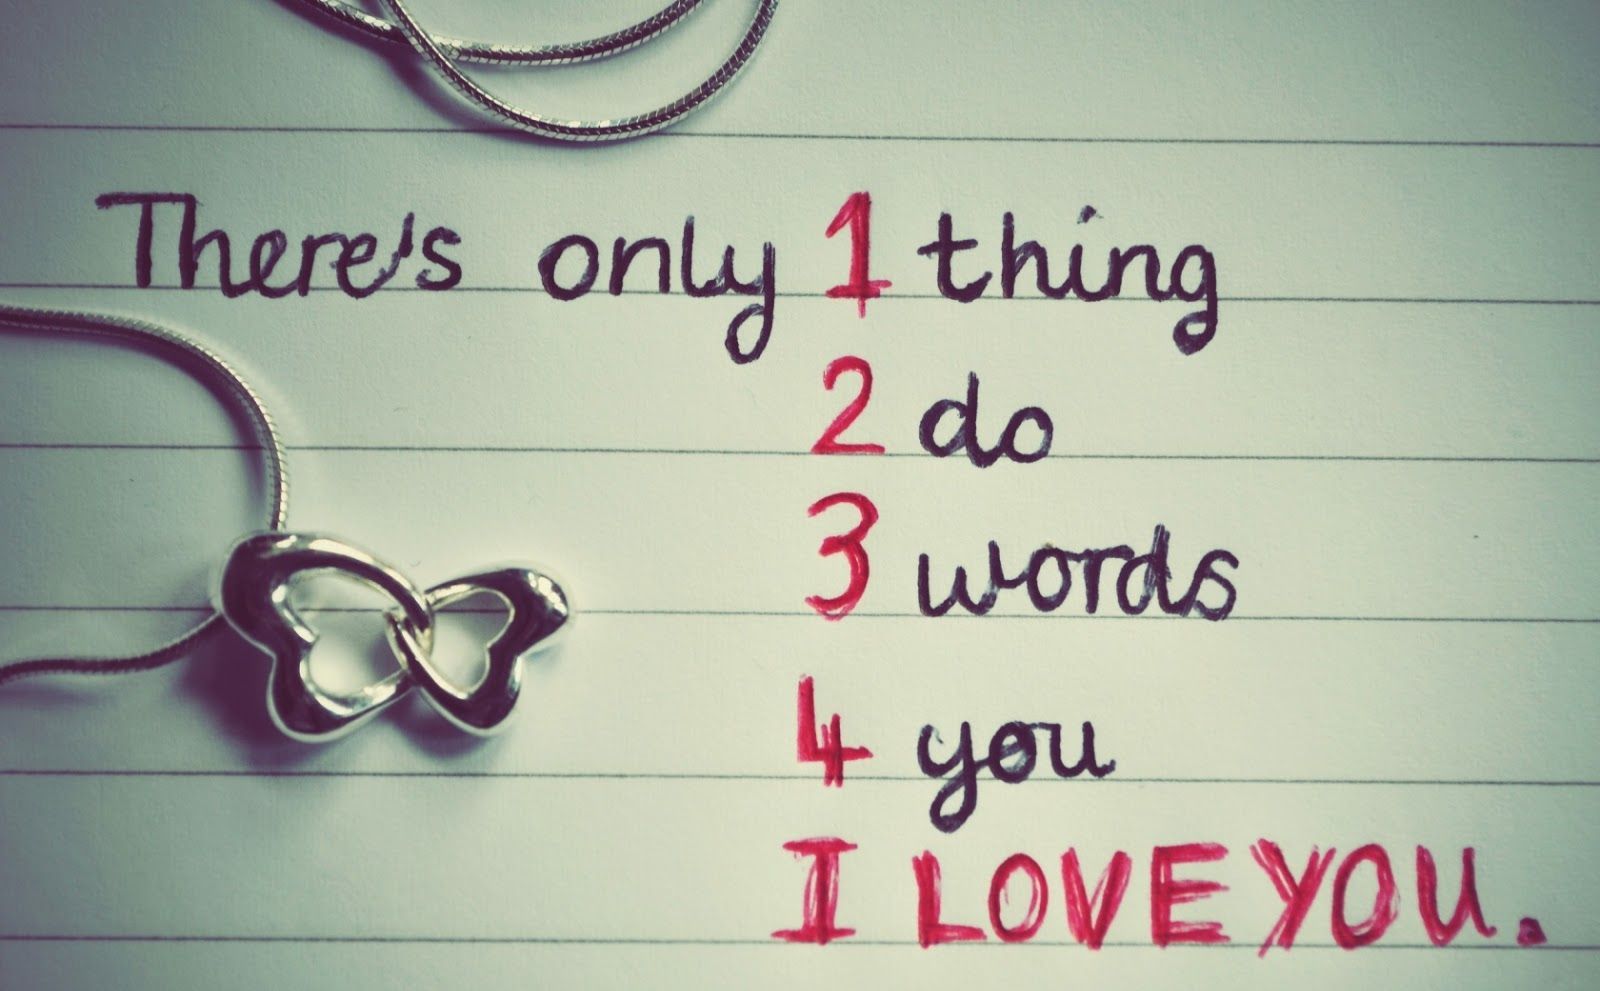 I Love You Quotes For Her image